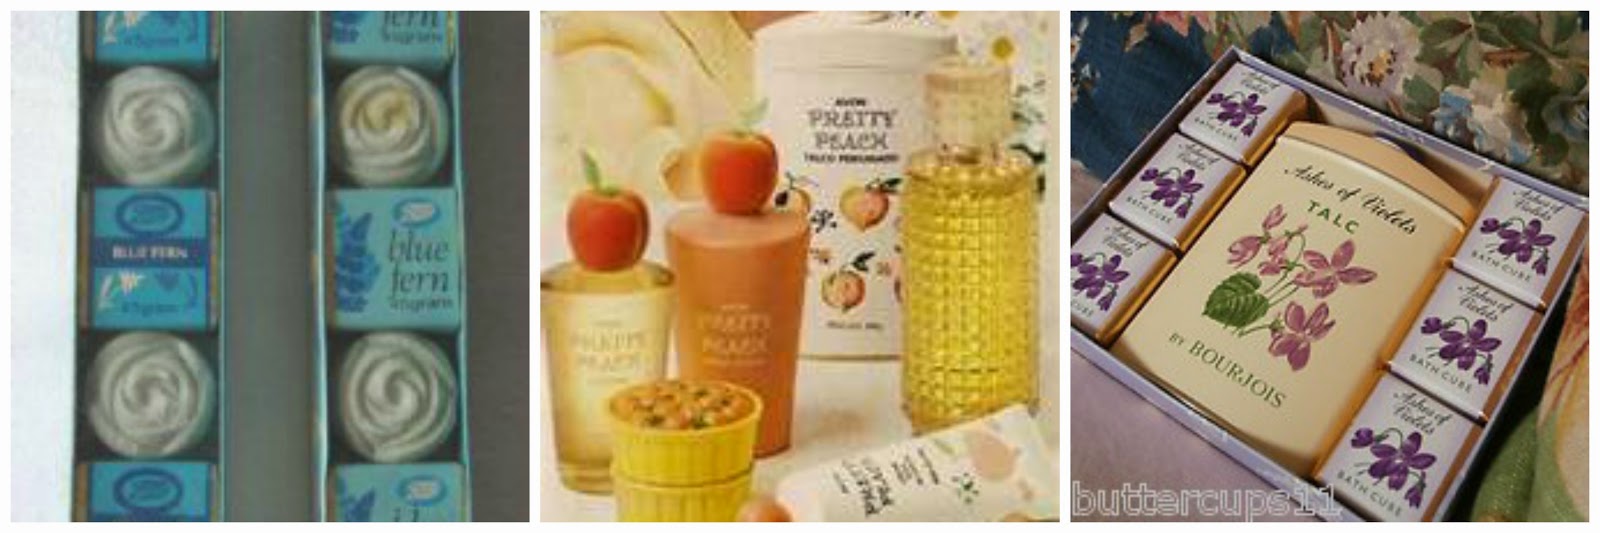 Seventies gift sets